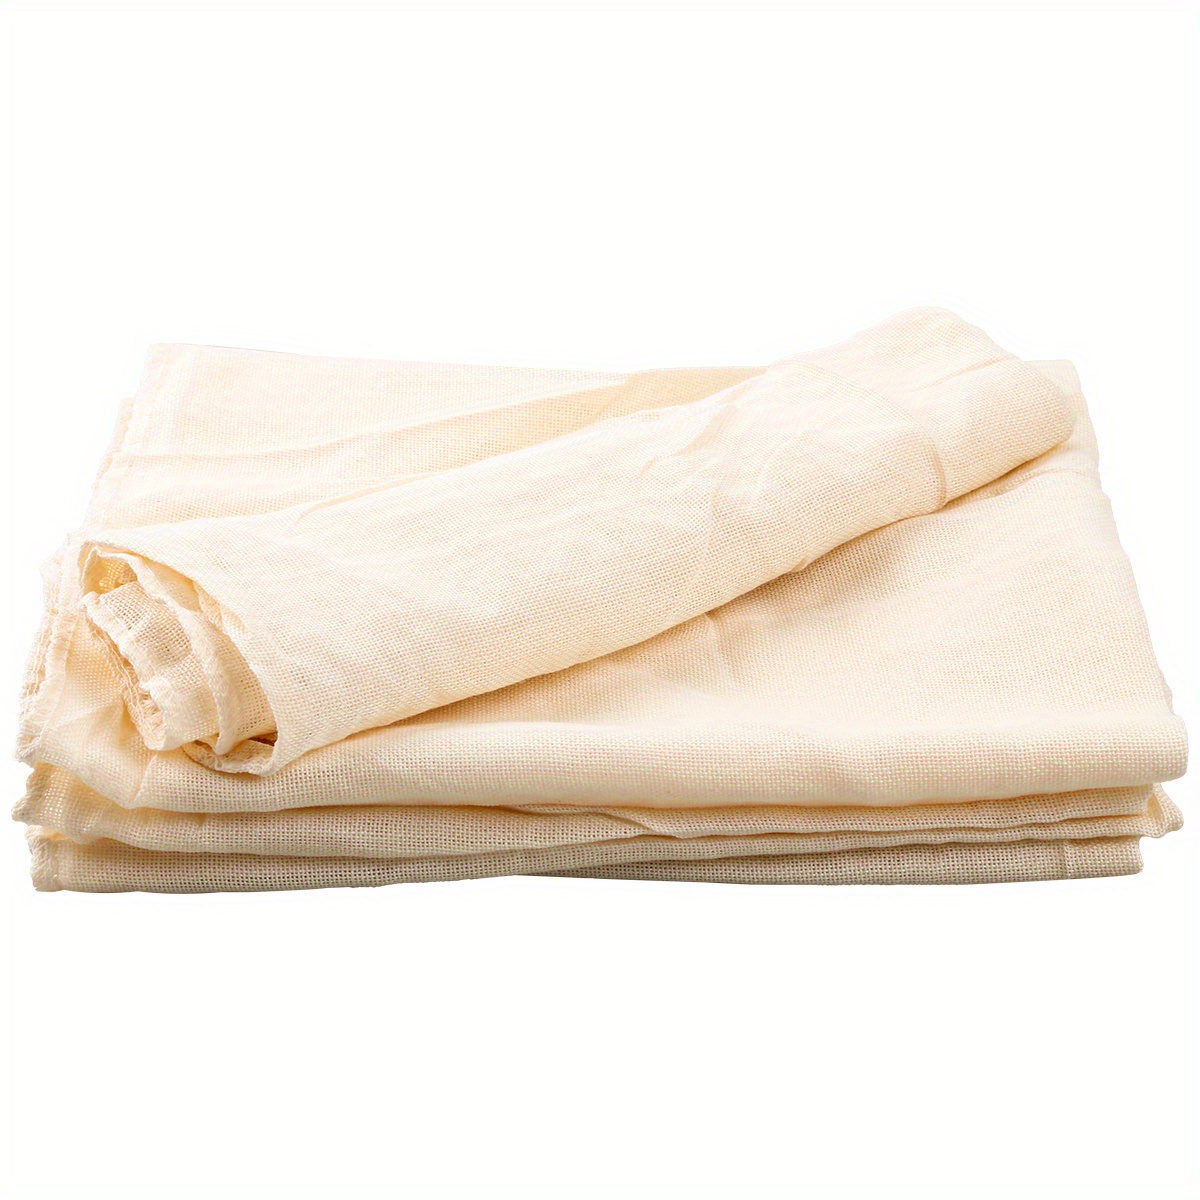 5pcs Cotton Cheesecloth,for Straining Cooking Reusable Muslin Cloth,for  Baking, Juicing, Cheese Making